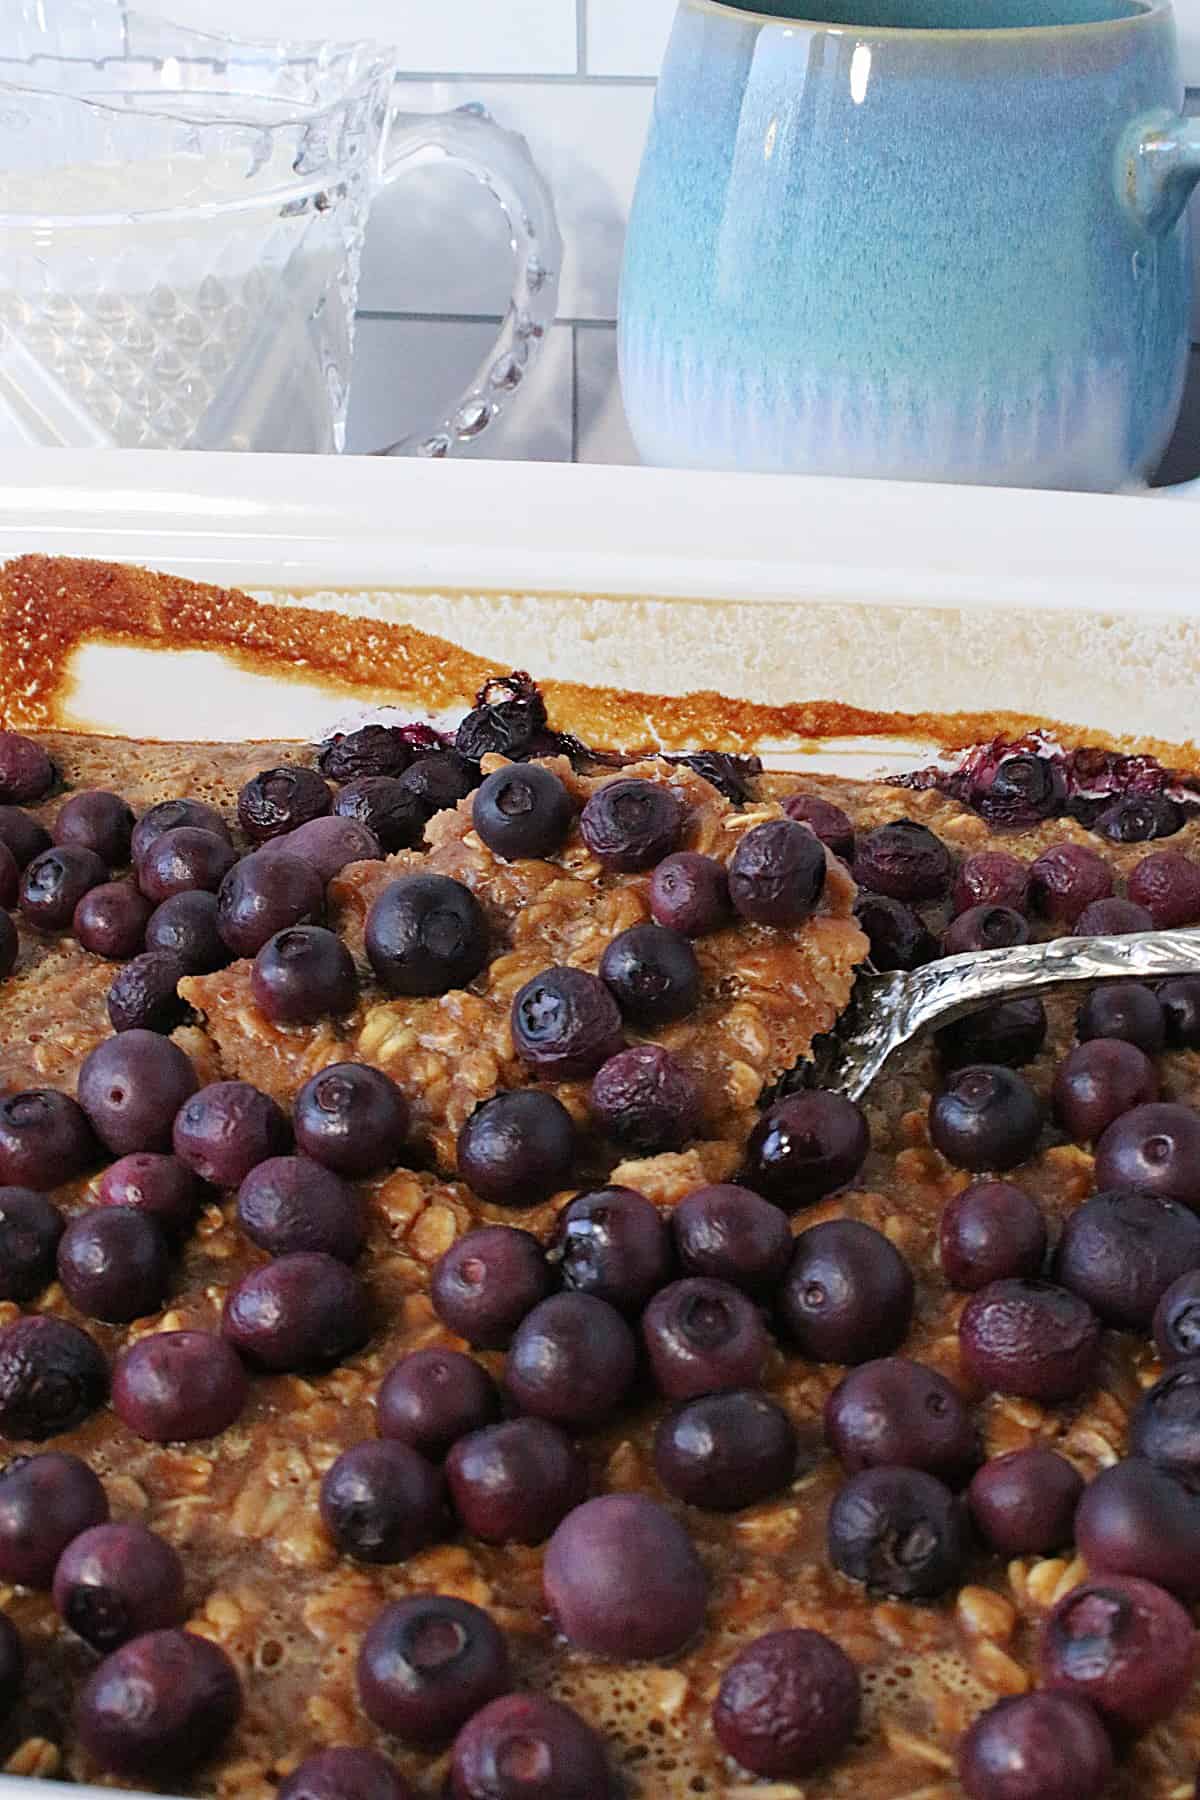 A serving spoon scooping out a portion of Baked Peanut Butter and Jelly Oatmeal in a casserole dish.